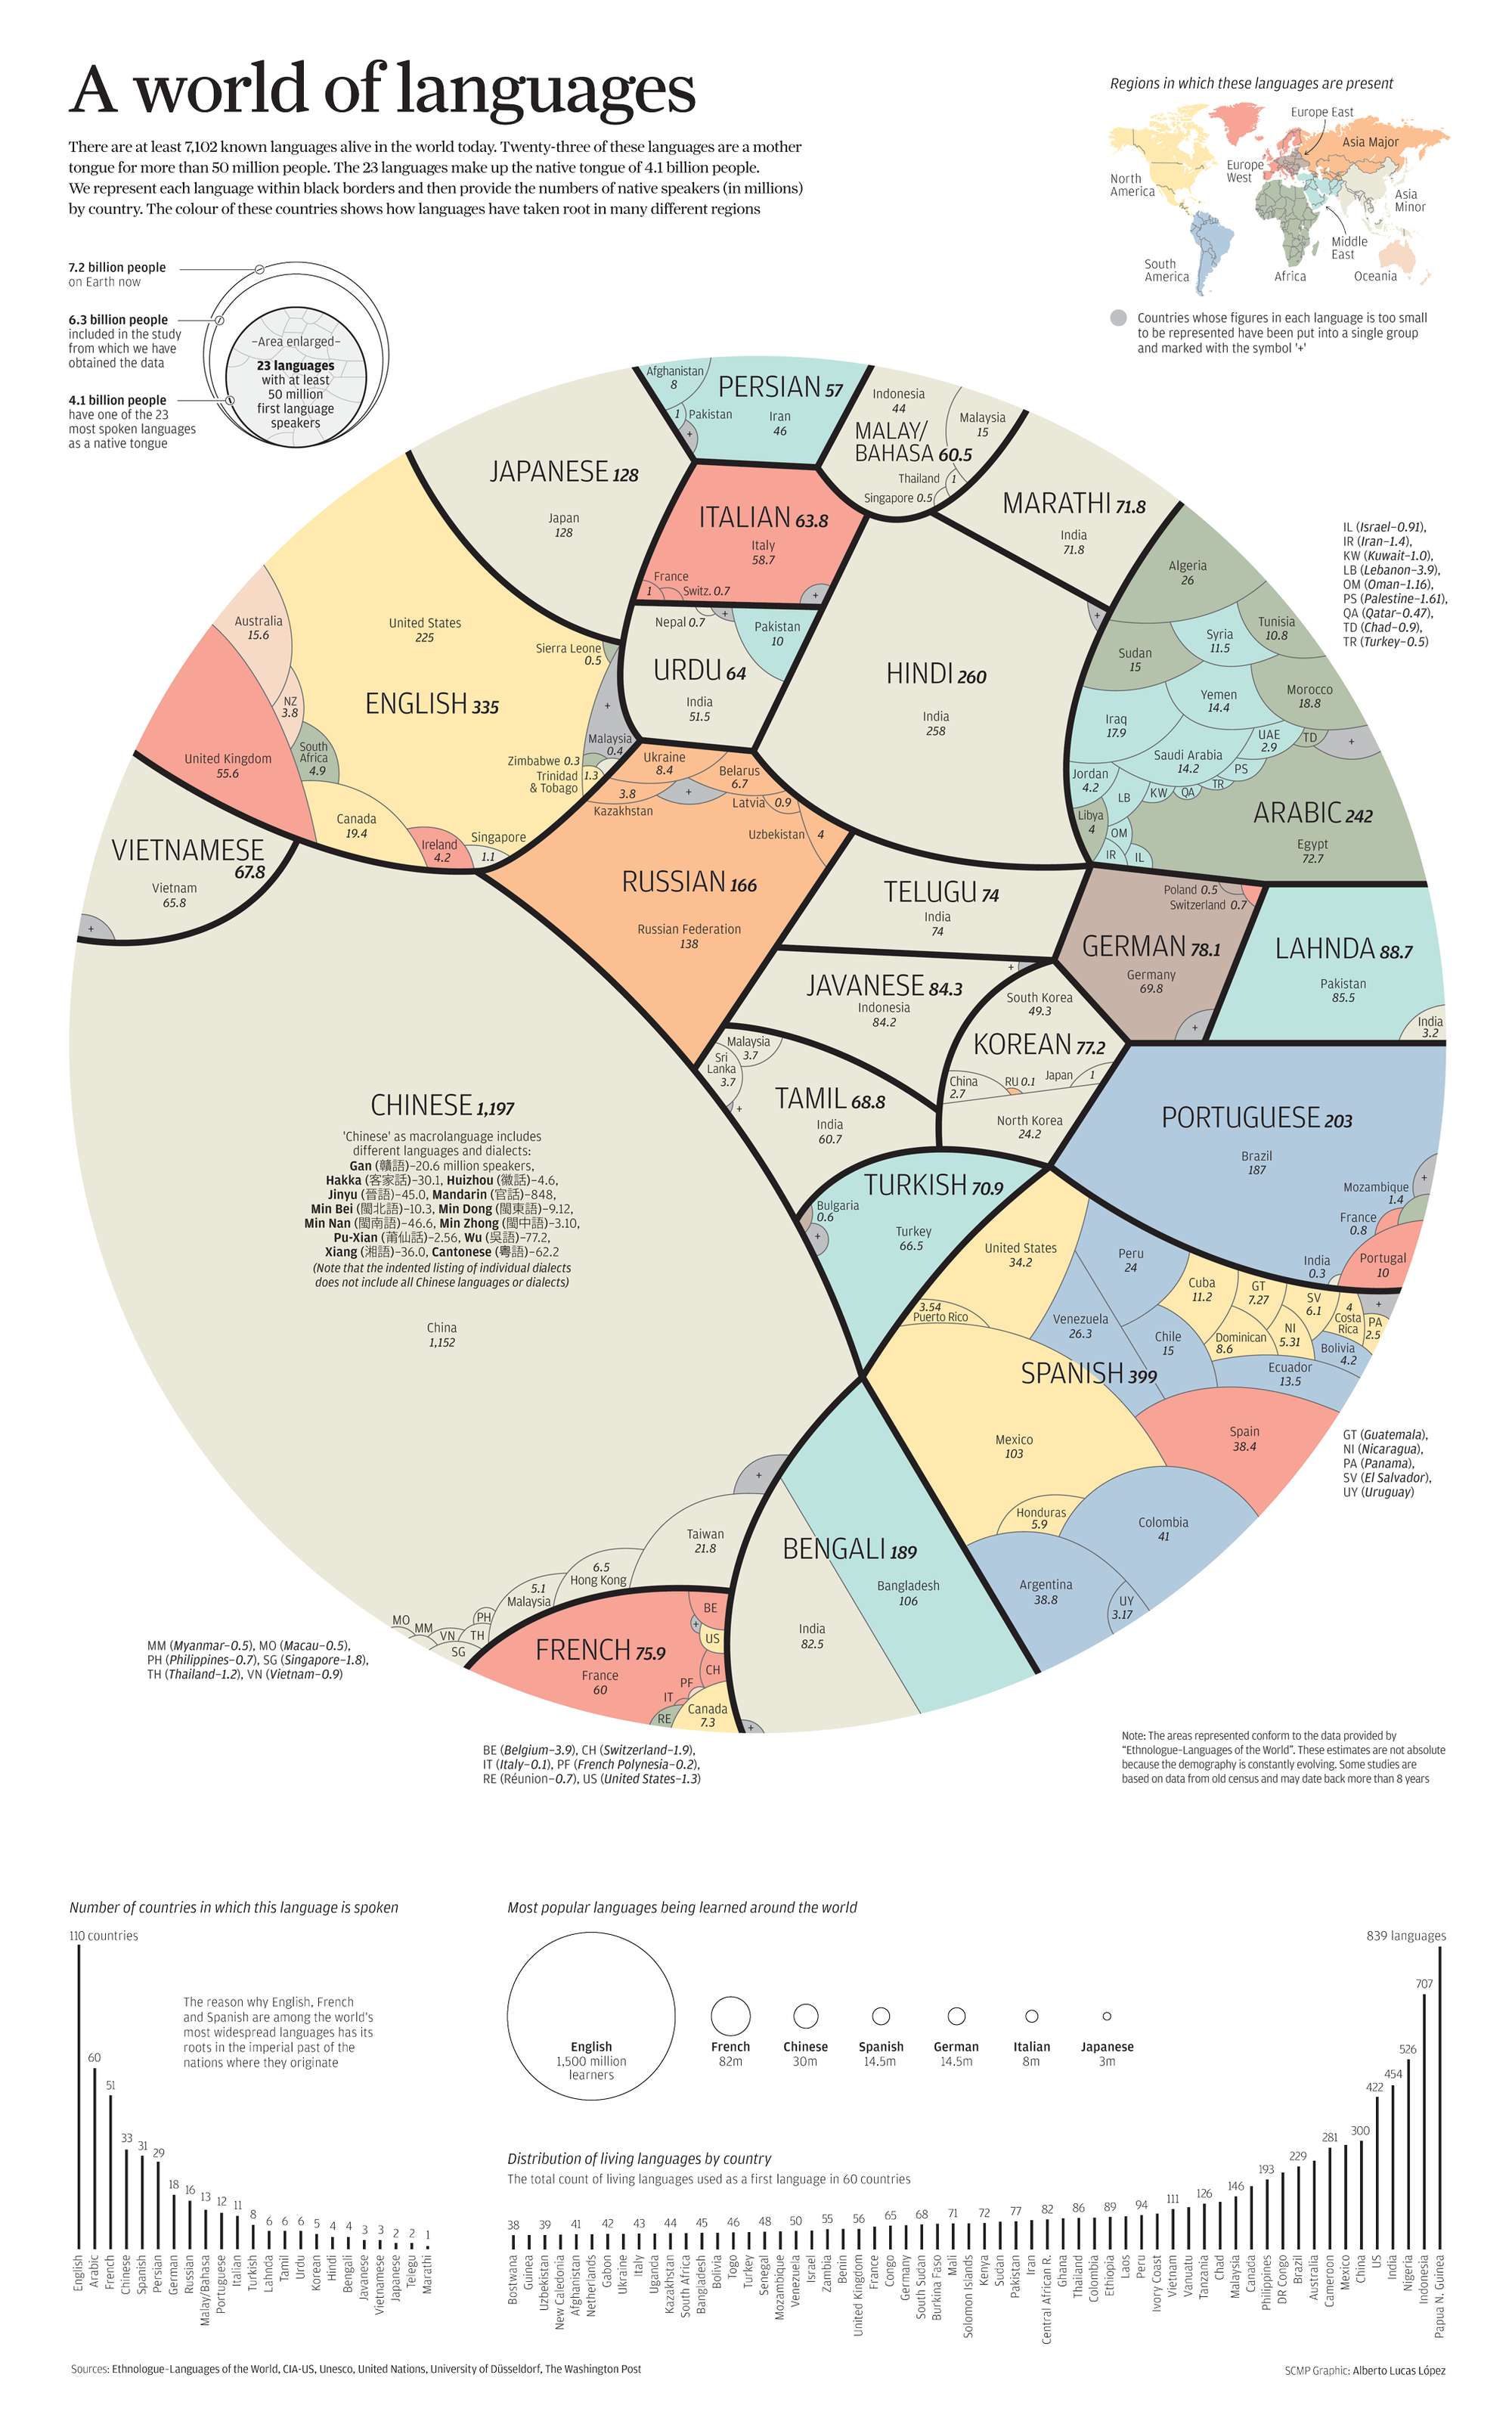 All World Languages in One Visualization, By Native Speakers